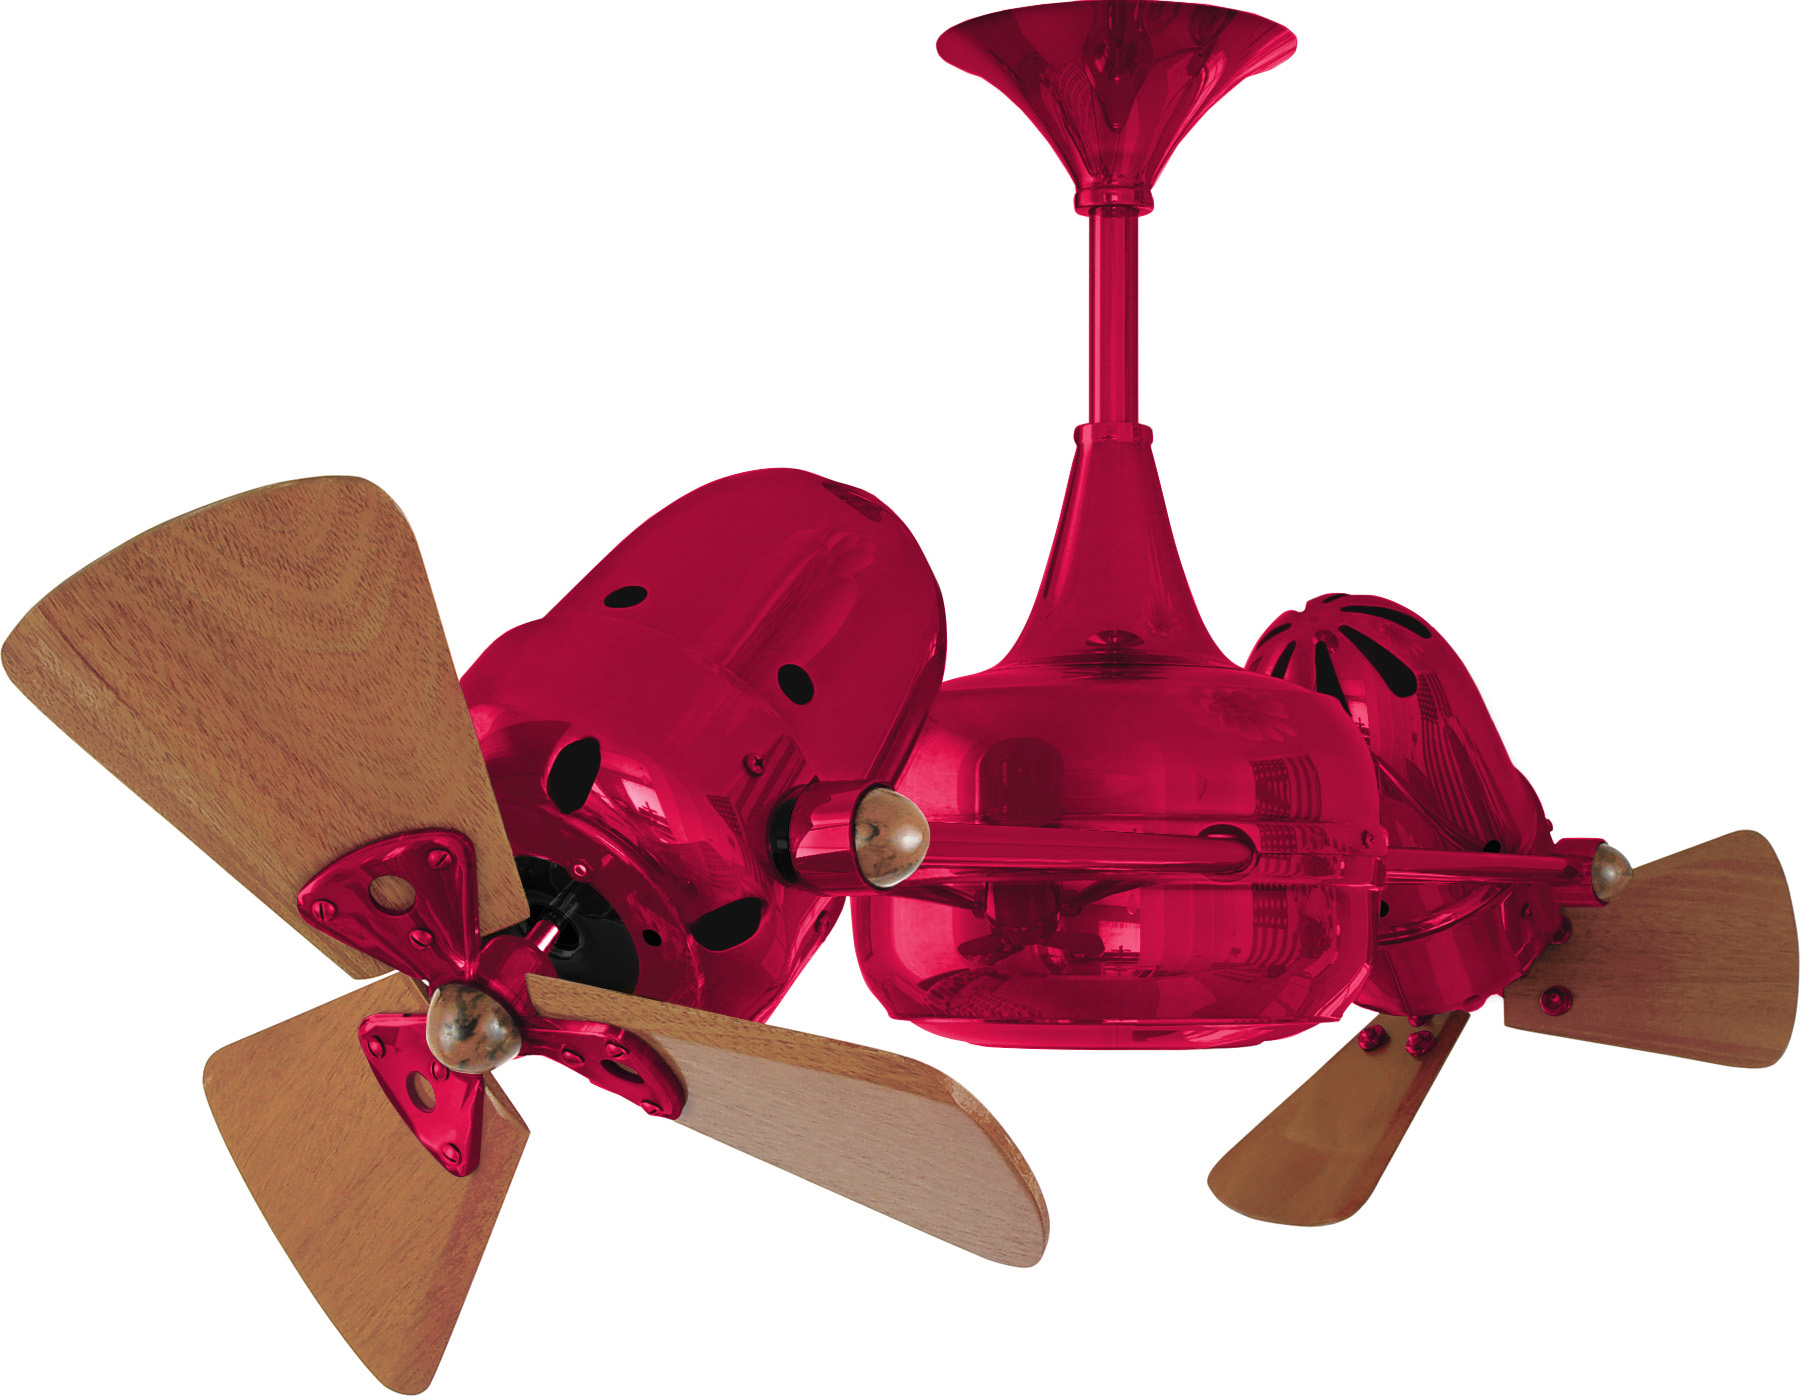 Duplo Dinamico rotational dual head ceiling fan in red / rubi finish with solid mahogany wood blades made by Matthews Fan Company.